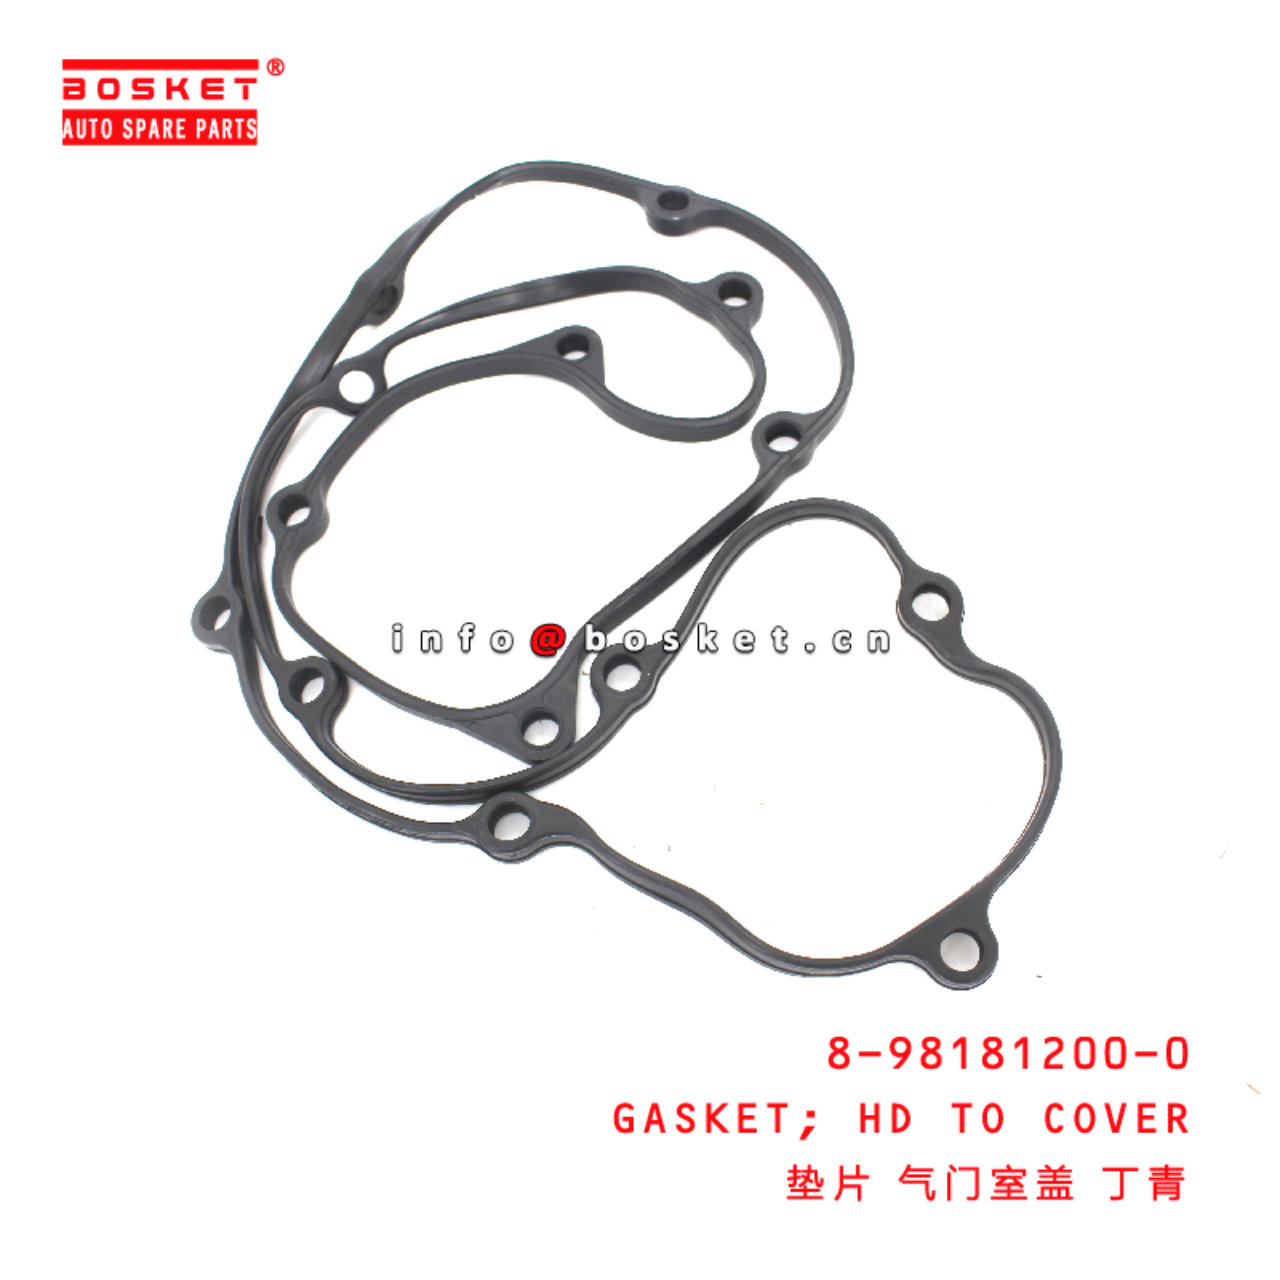 8-98181200-0 Head To Cover Gasket suitable for ISU...